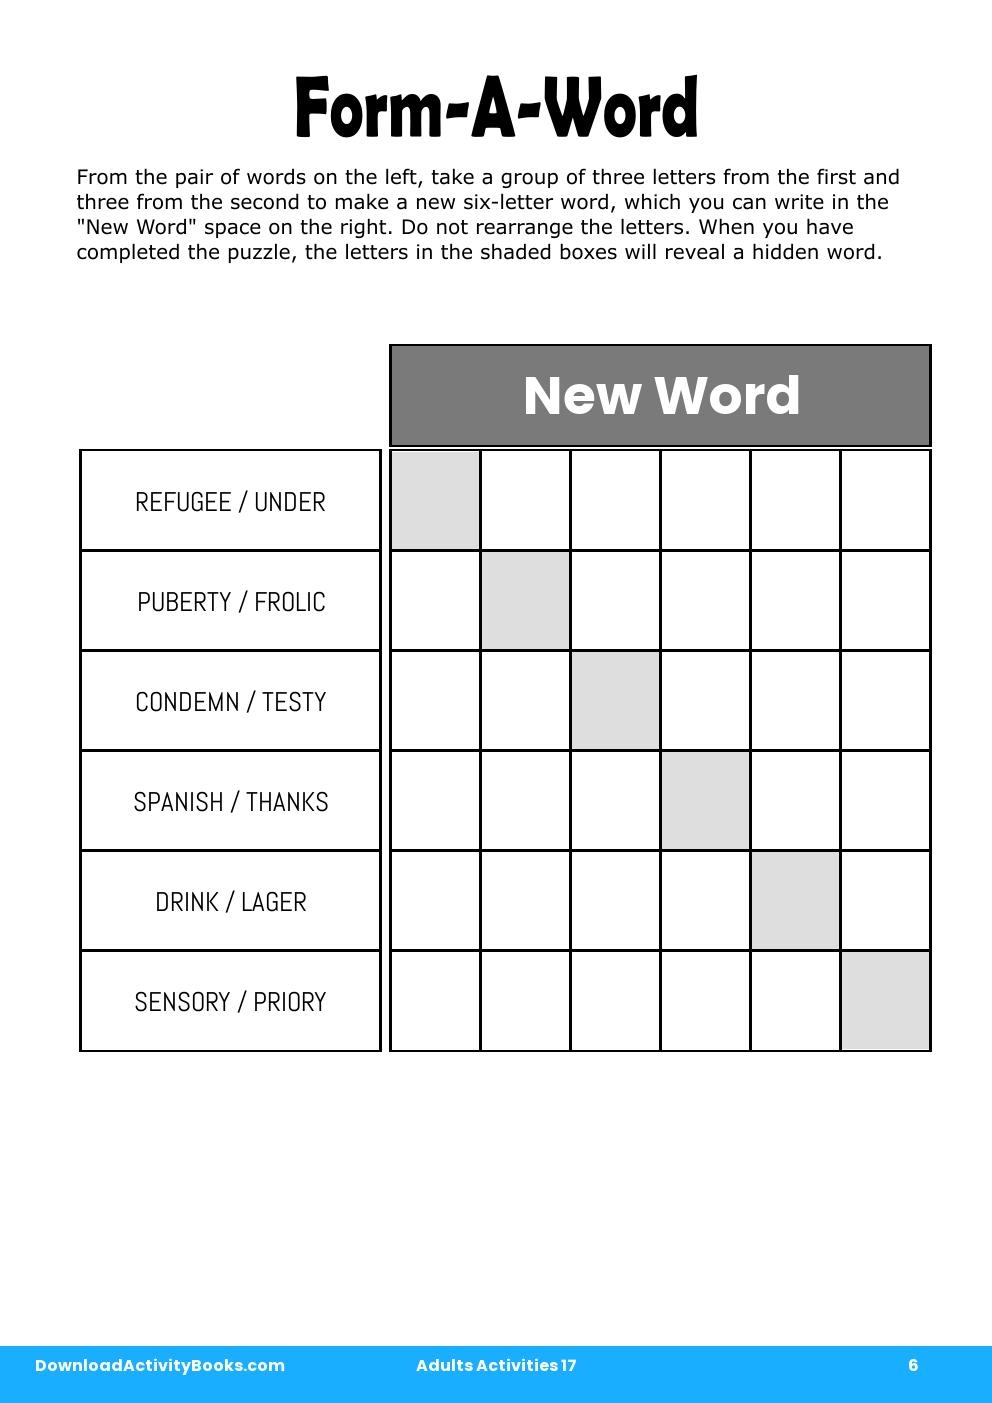 Form-A-Word in Adults Activities 17